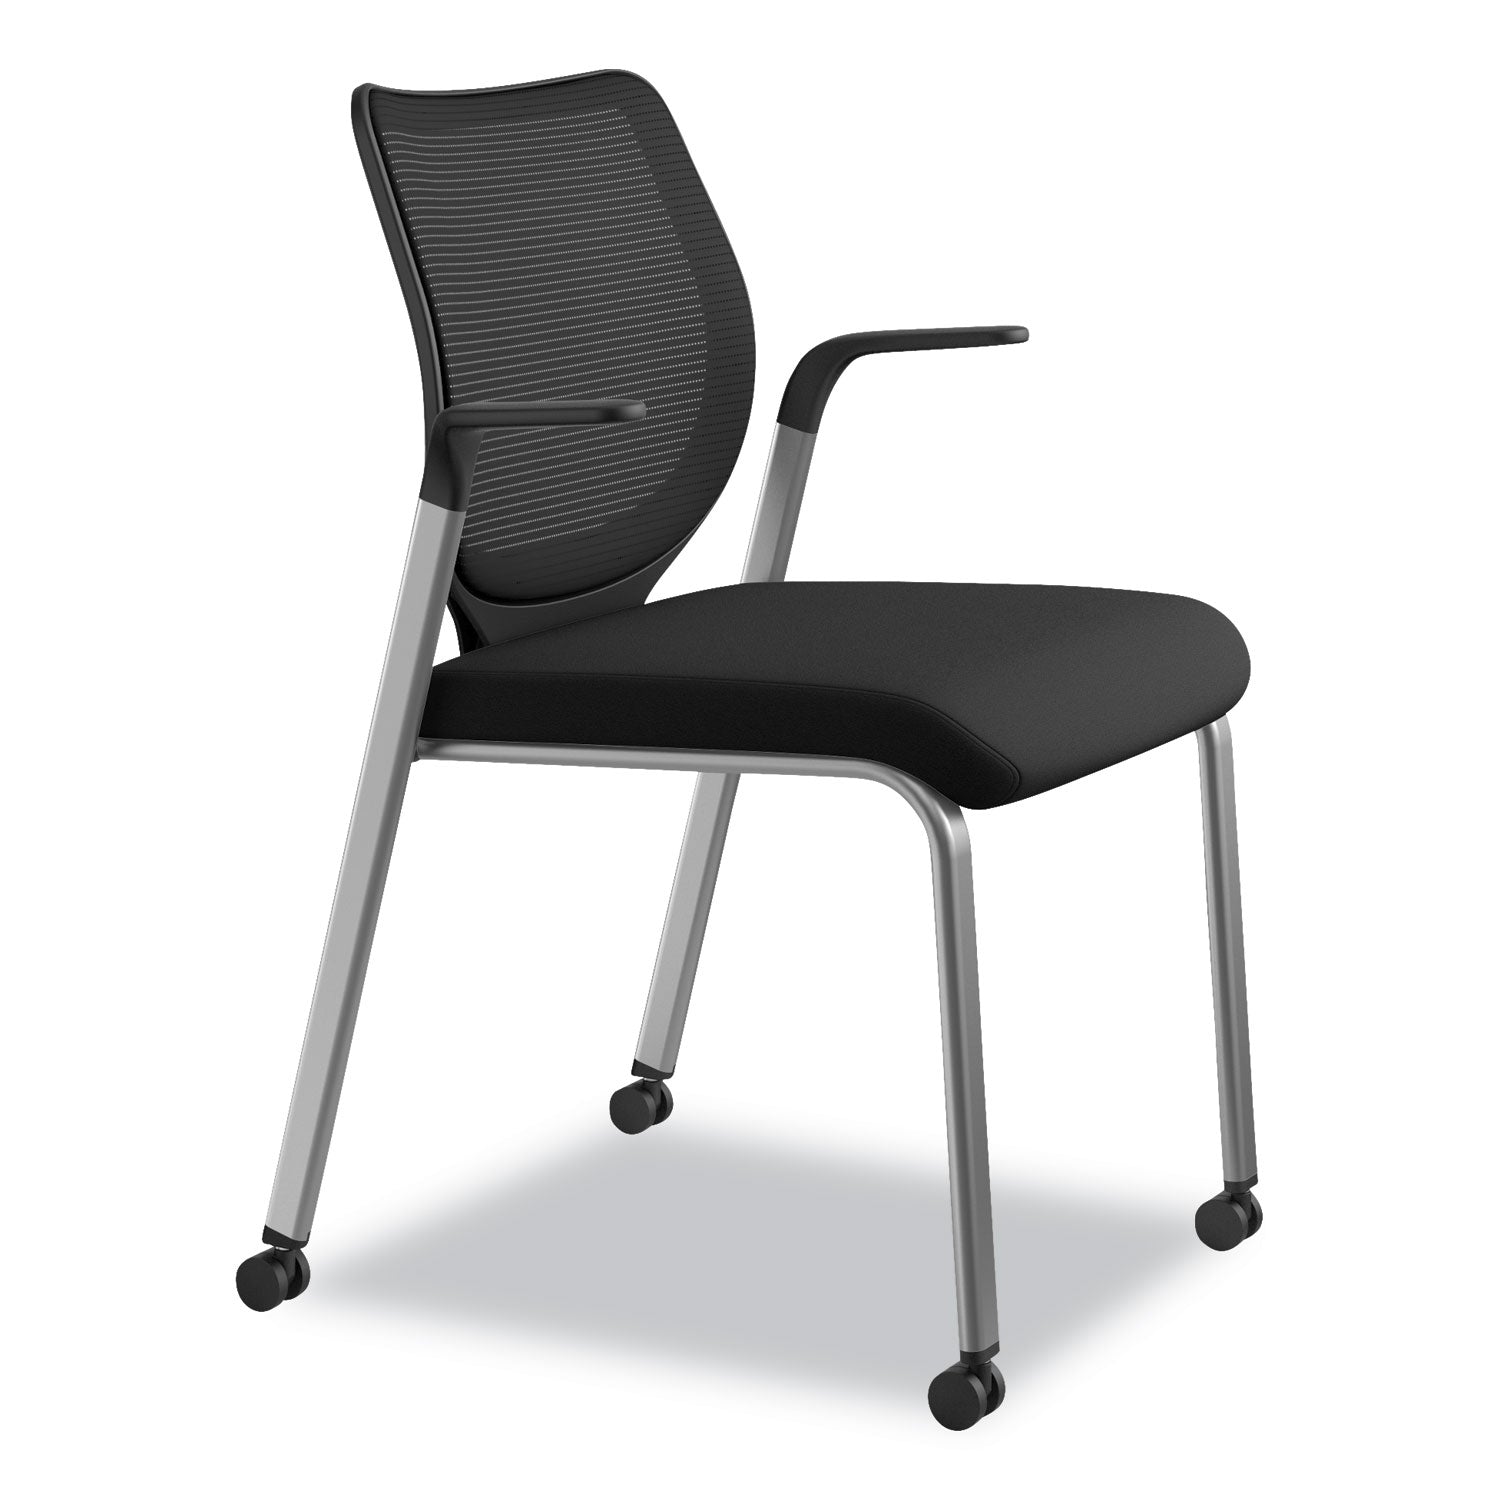 nucleus-series-multipurpose-stacking-chair-with-ilira-stretch-m4-back-supports-up-to-300-lb-black-seat-back-platinum-base_honn606hcu10t1 - 2